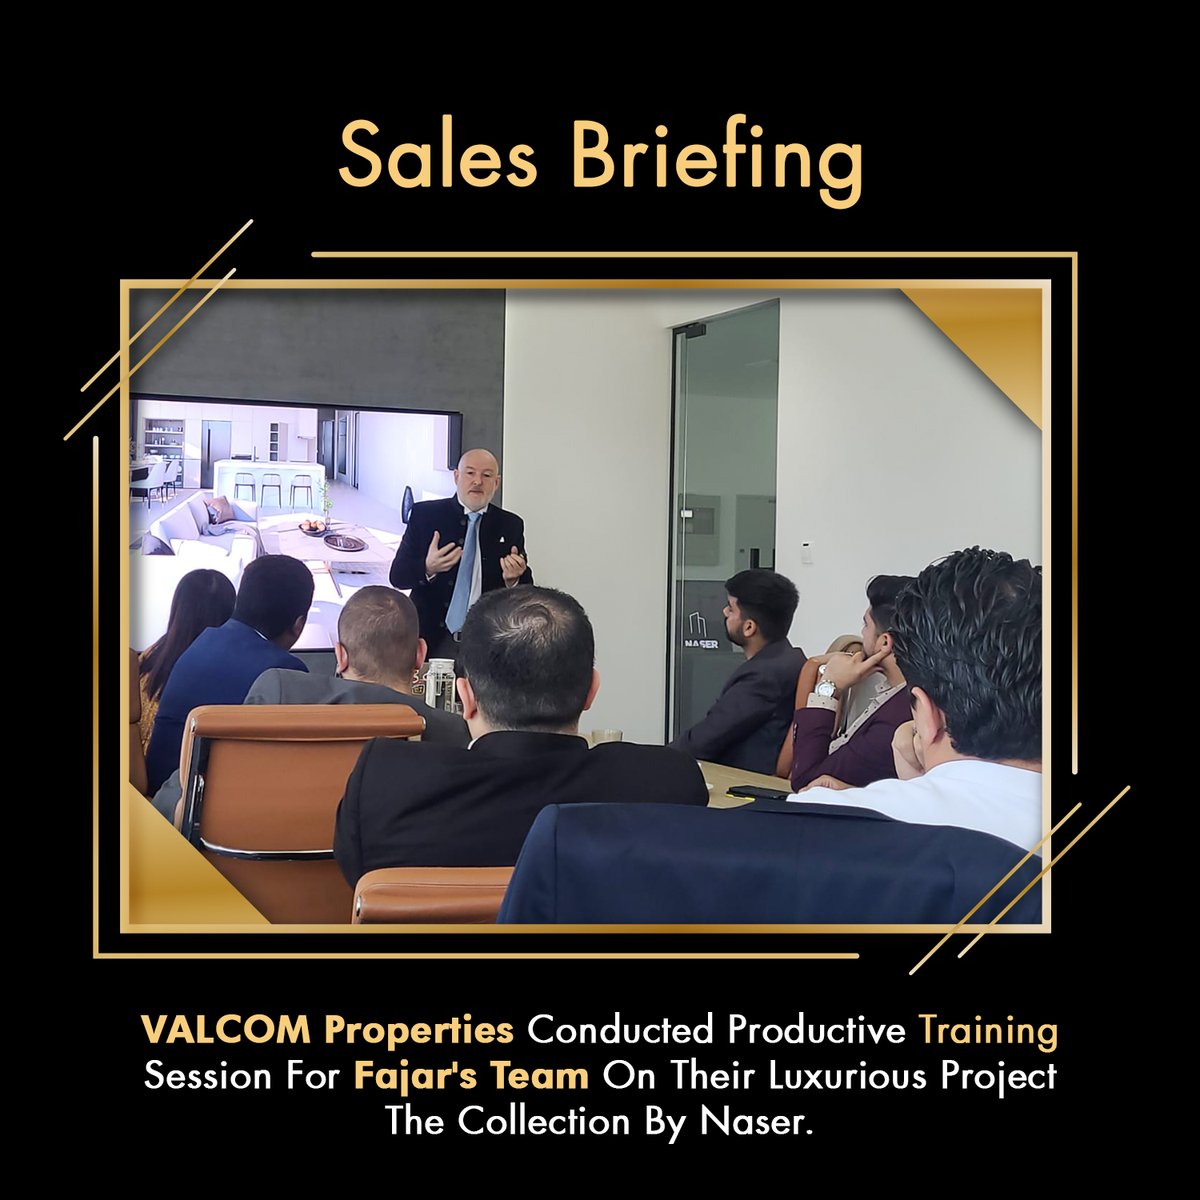 VALCOM Properties Conducted a Productive Training Session For Fajar's Team On Their Luxurious Project The Collection By Naser.✨

Now we're more equipped to provide top-notch solutions and unparalleled customer experience.🙌🏻✨

#salesbriefing #valcomproperties #training